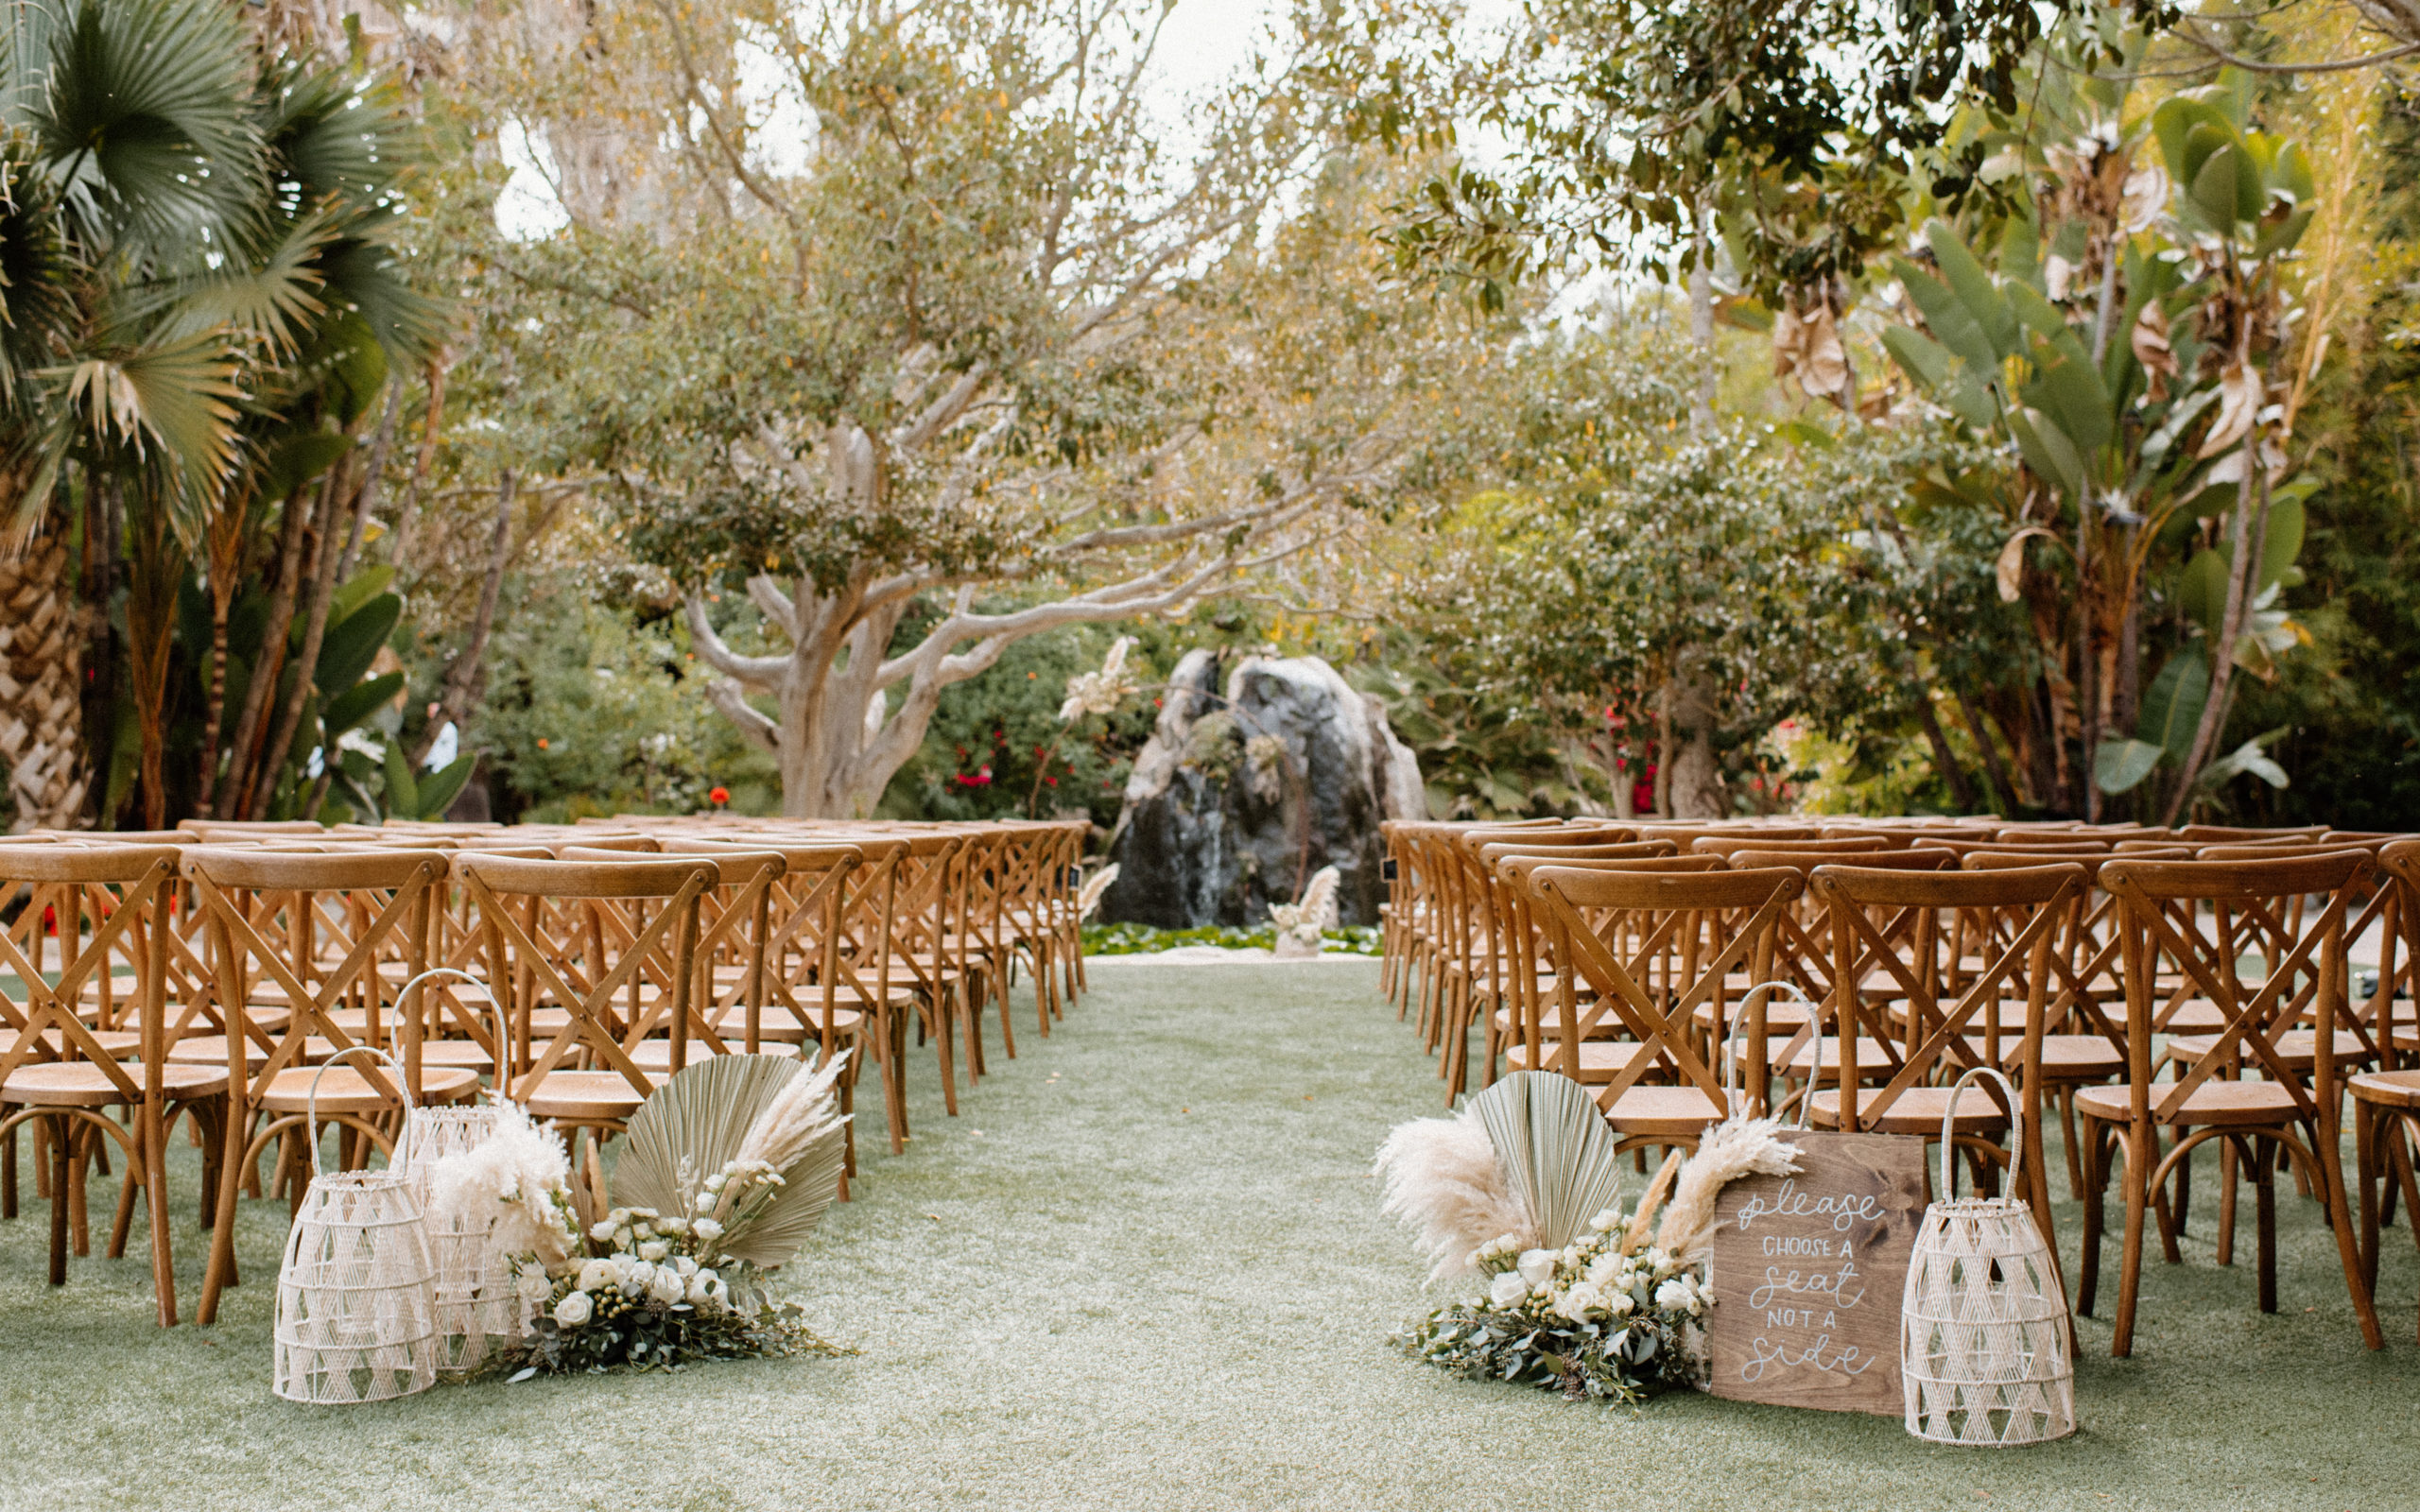 The ceremony site all set up beautifully at the Botanica Oceanside wedding venue